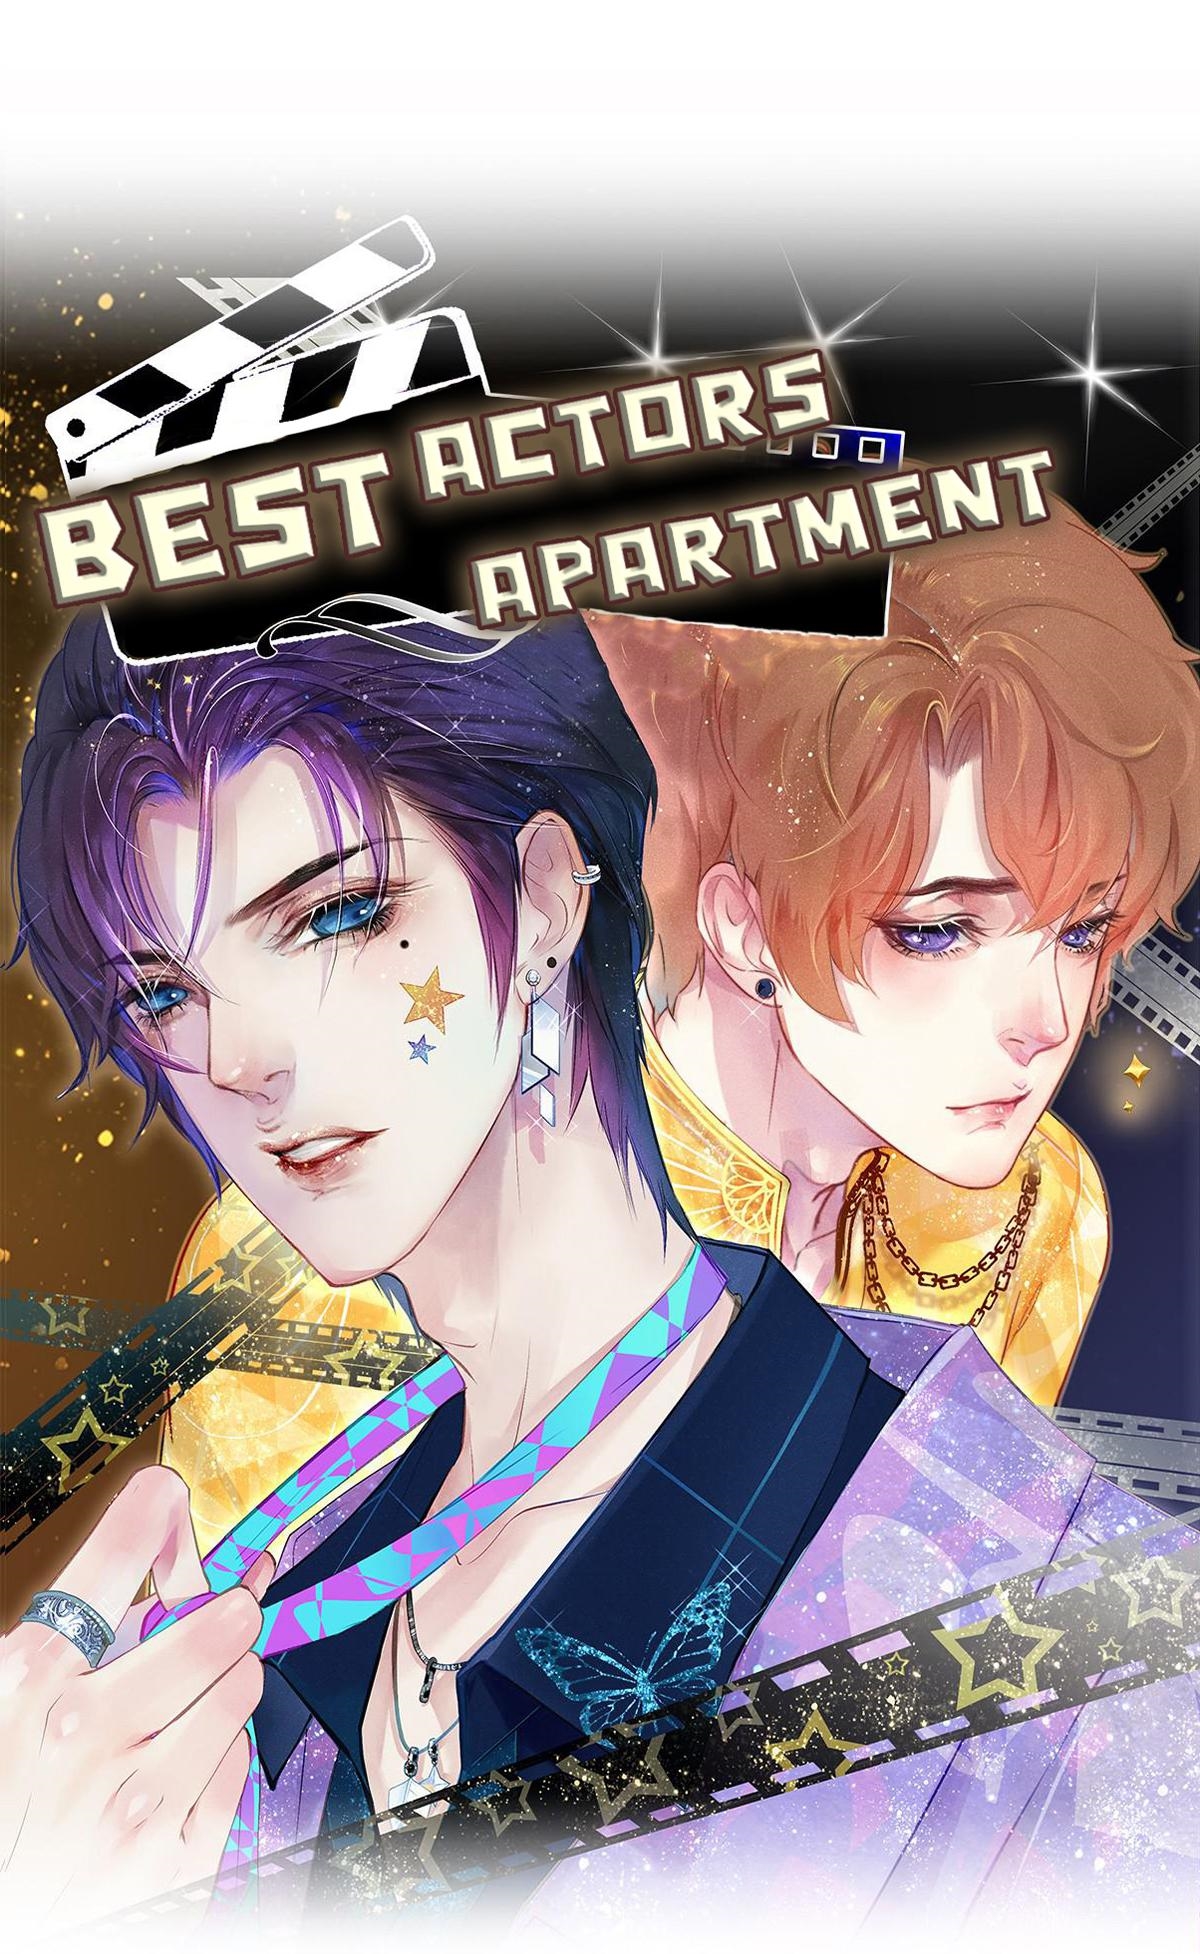 Best Actors Apartment Chapter 12: Speedy Electric Scooter - Picture 1